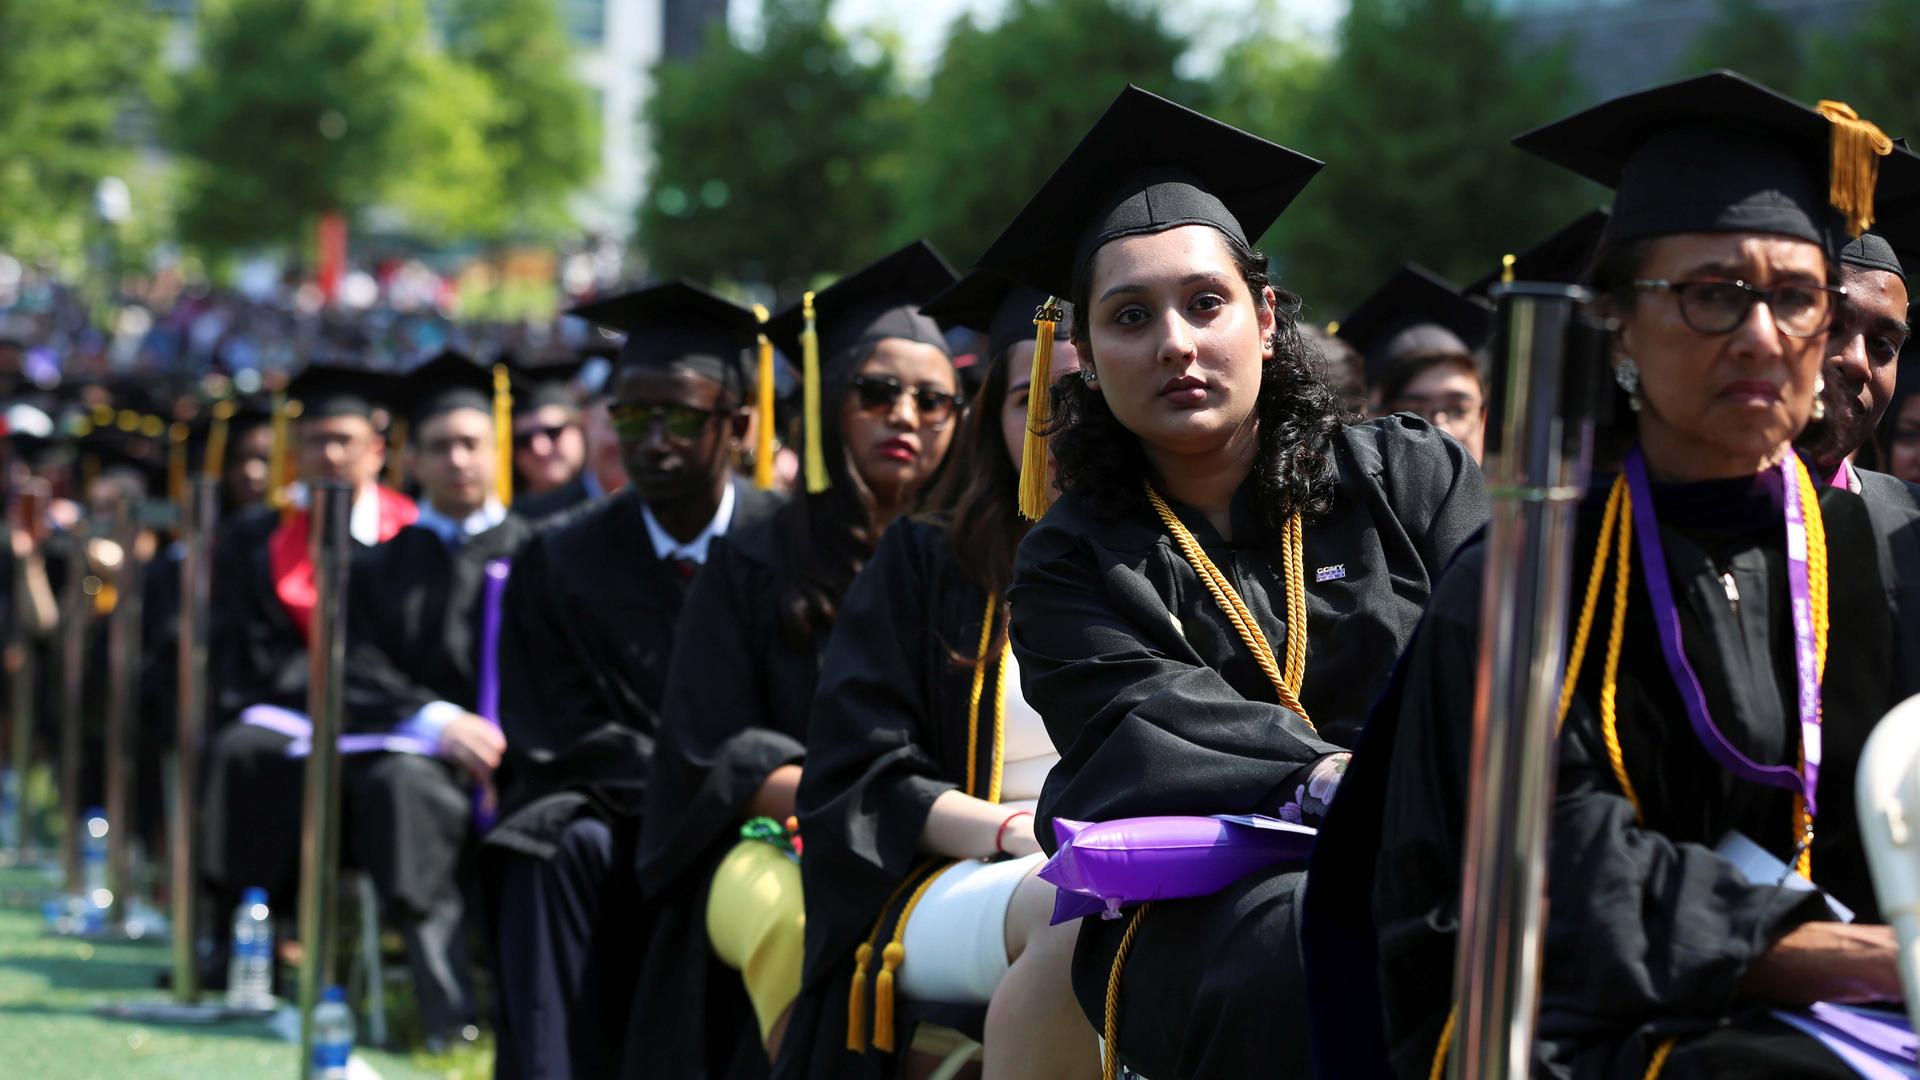 Graduates of The City College of New York sit in their seats at their commencement ceremony in Manhattan on May 31, 2019.